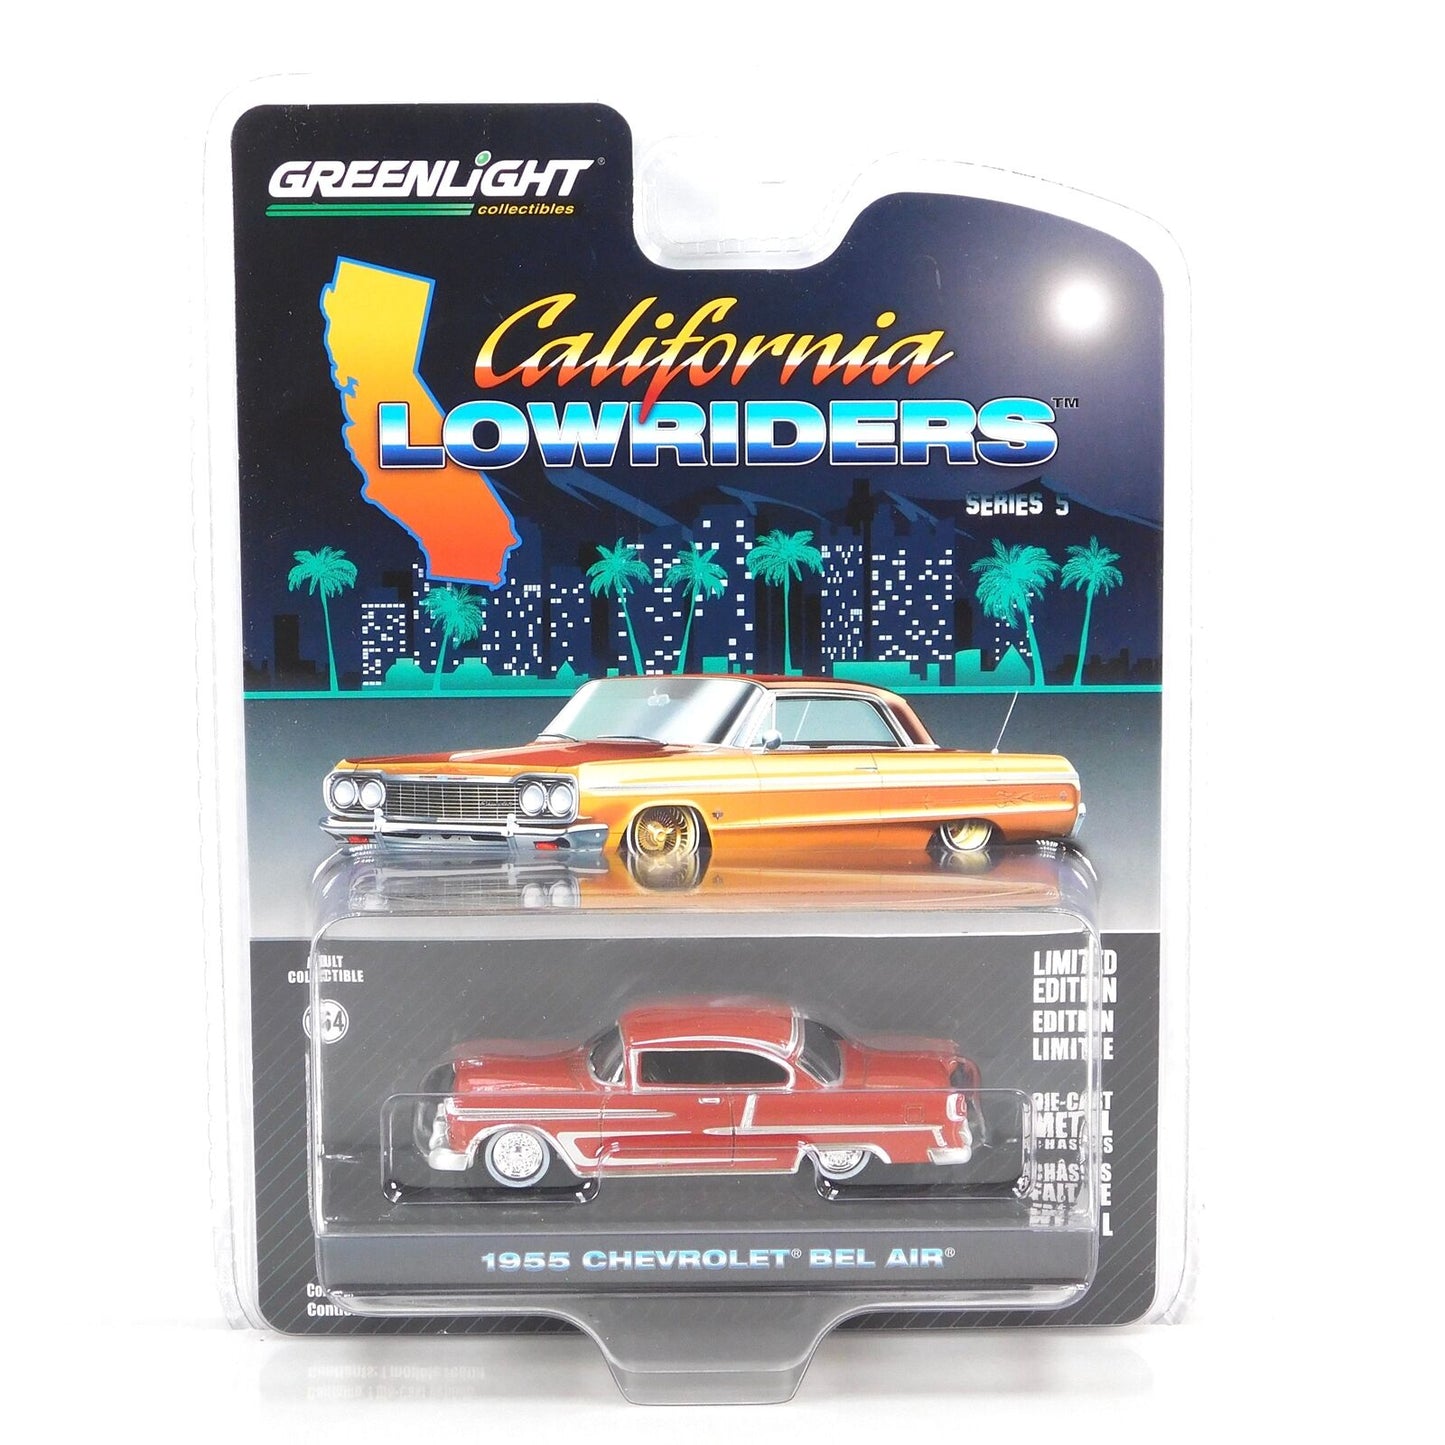 GreenLight 1:64 California Lowriders Series 5 - 1955 Chevrolet Bel Air – Red and Silver 63060-B